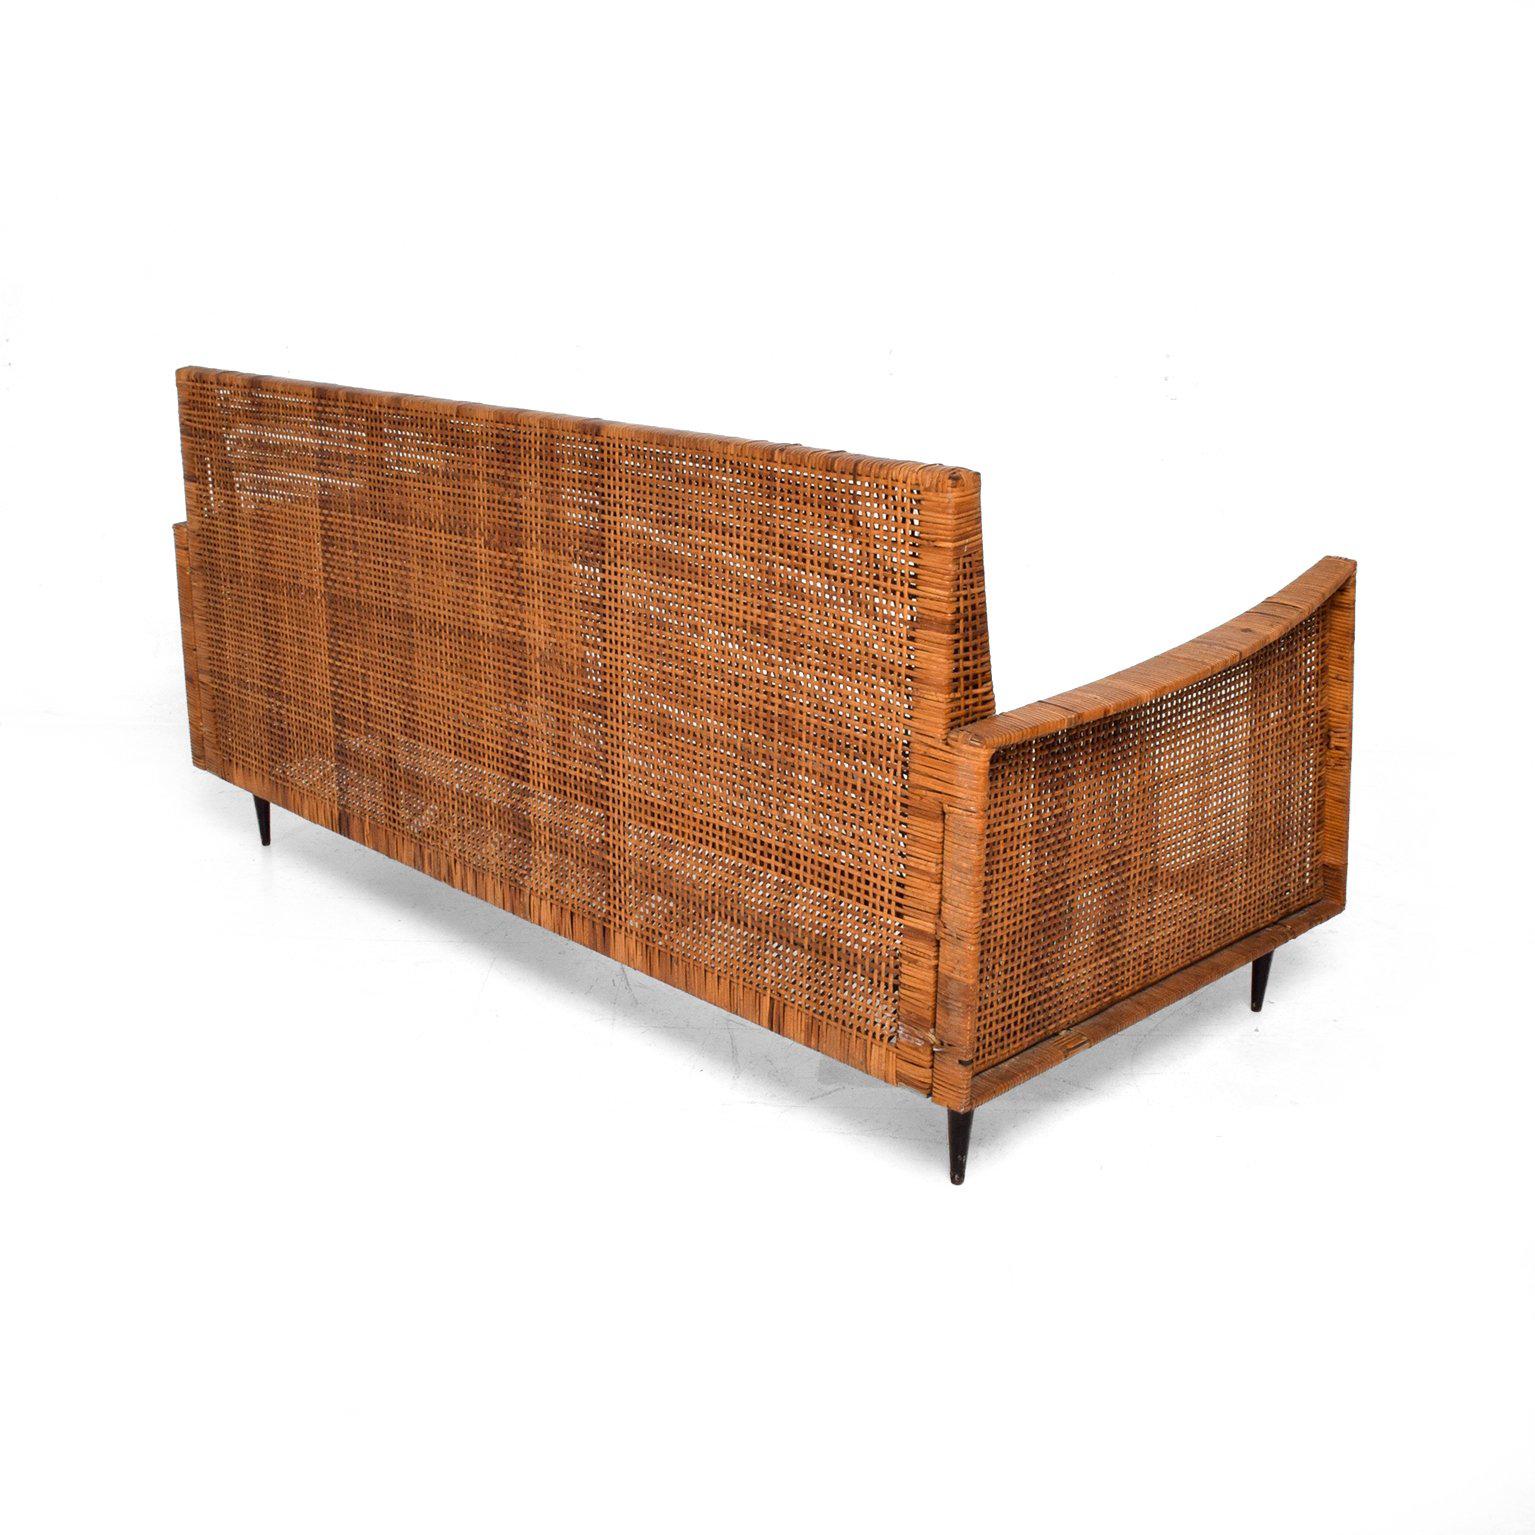 Mexican Mid-Century Modern Cane Loveseat Attributed to Arturo Pani